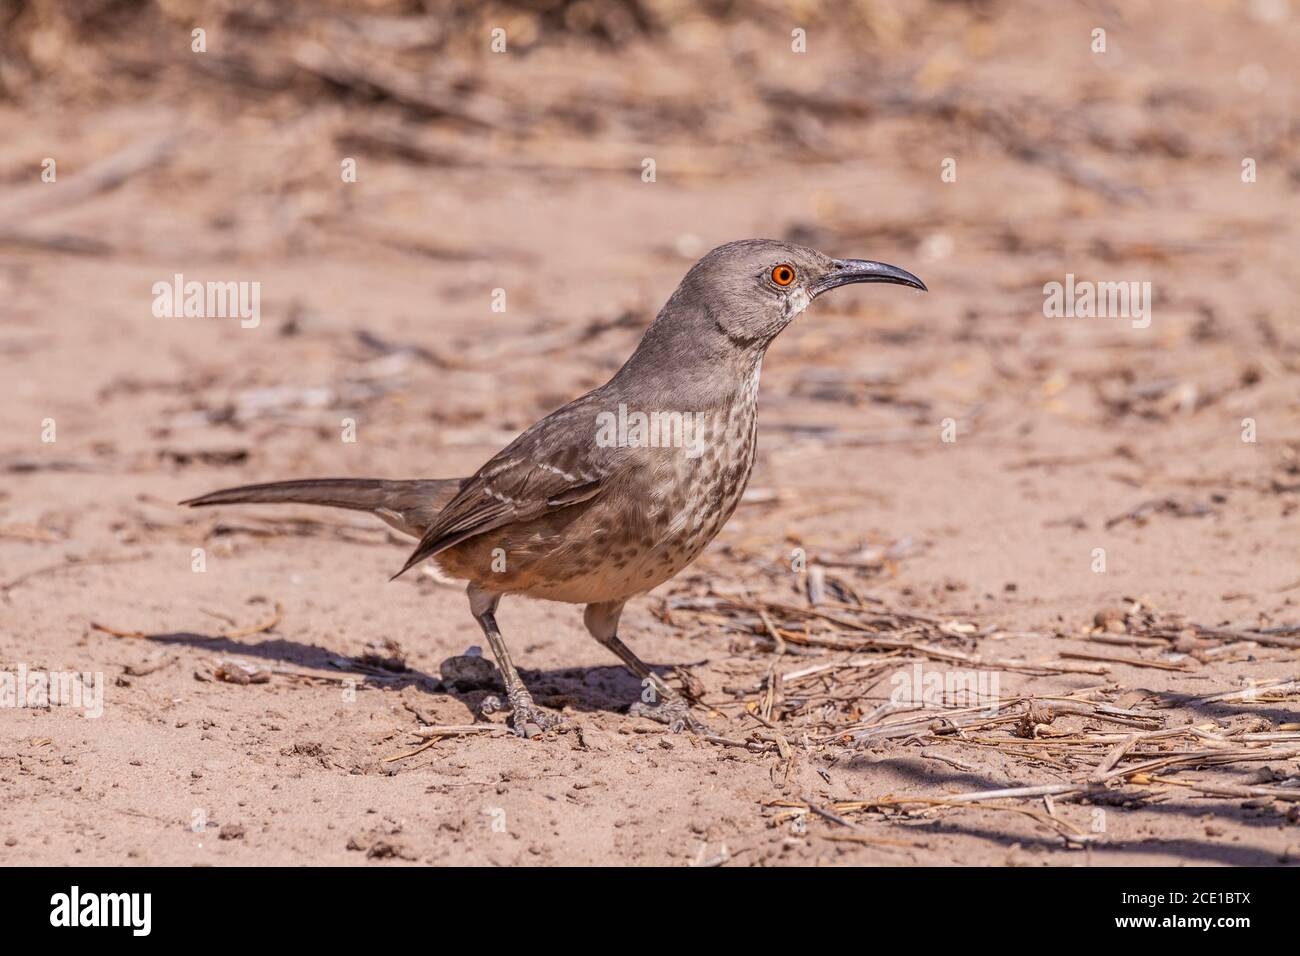 Curve-billed Thrasher, Toxostoma curvirostre, at the Javelina-Martin ranch and refuge near McAllen, Texas, in the Rio Grande Valley. Stock Photo